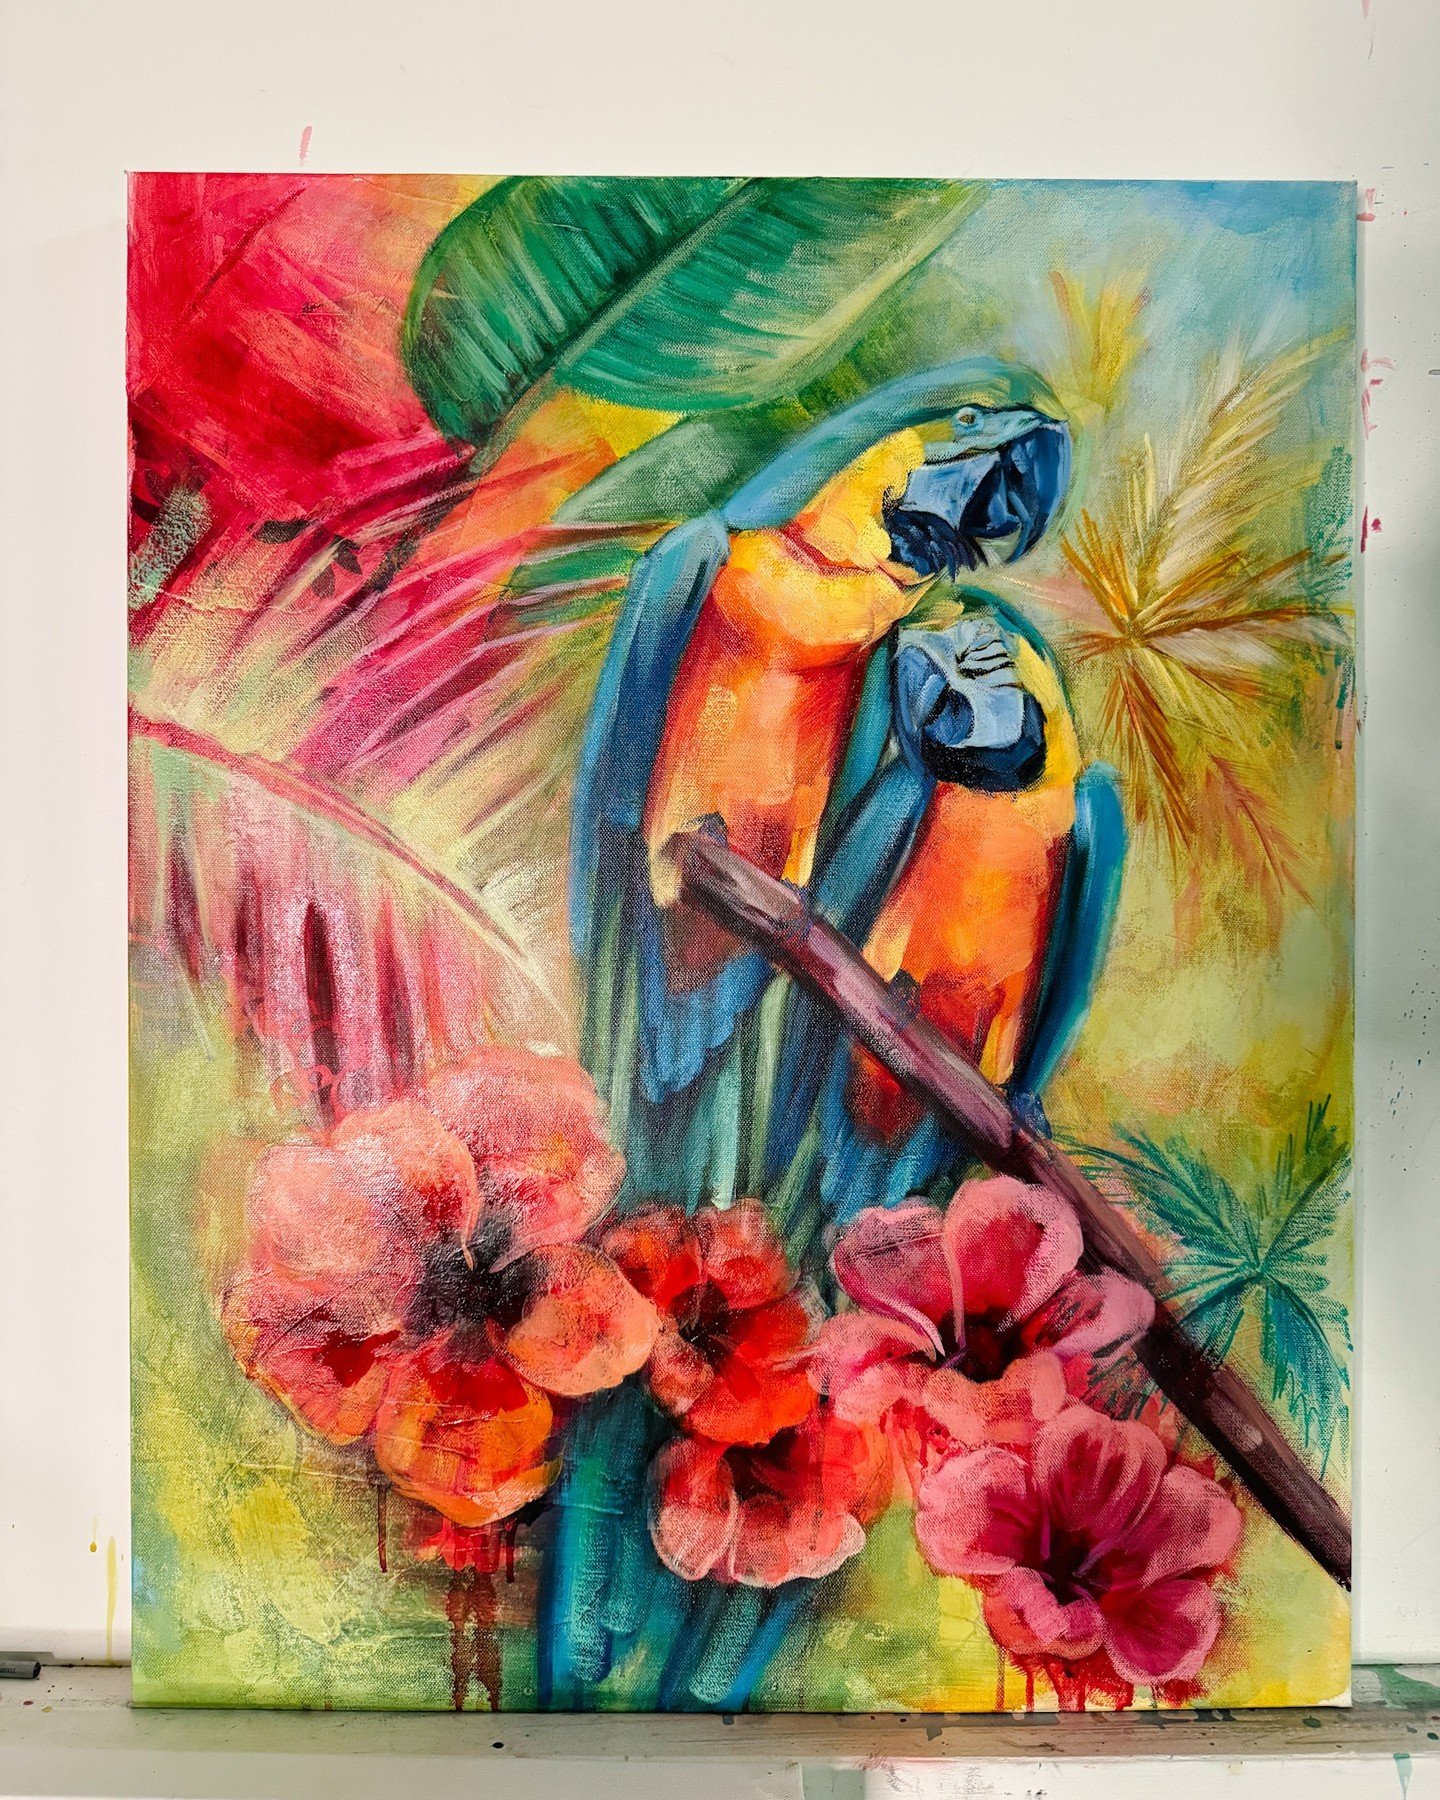 🌴Excited to share a sneak peek of my creation for a stunning island resort in Belize! These vibrant pieces are destined for the honeymoon suite, celebrating the theme of lovebirds. 🦜💕

Creating these pieces has been an incredible journey, and I ca